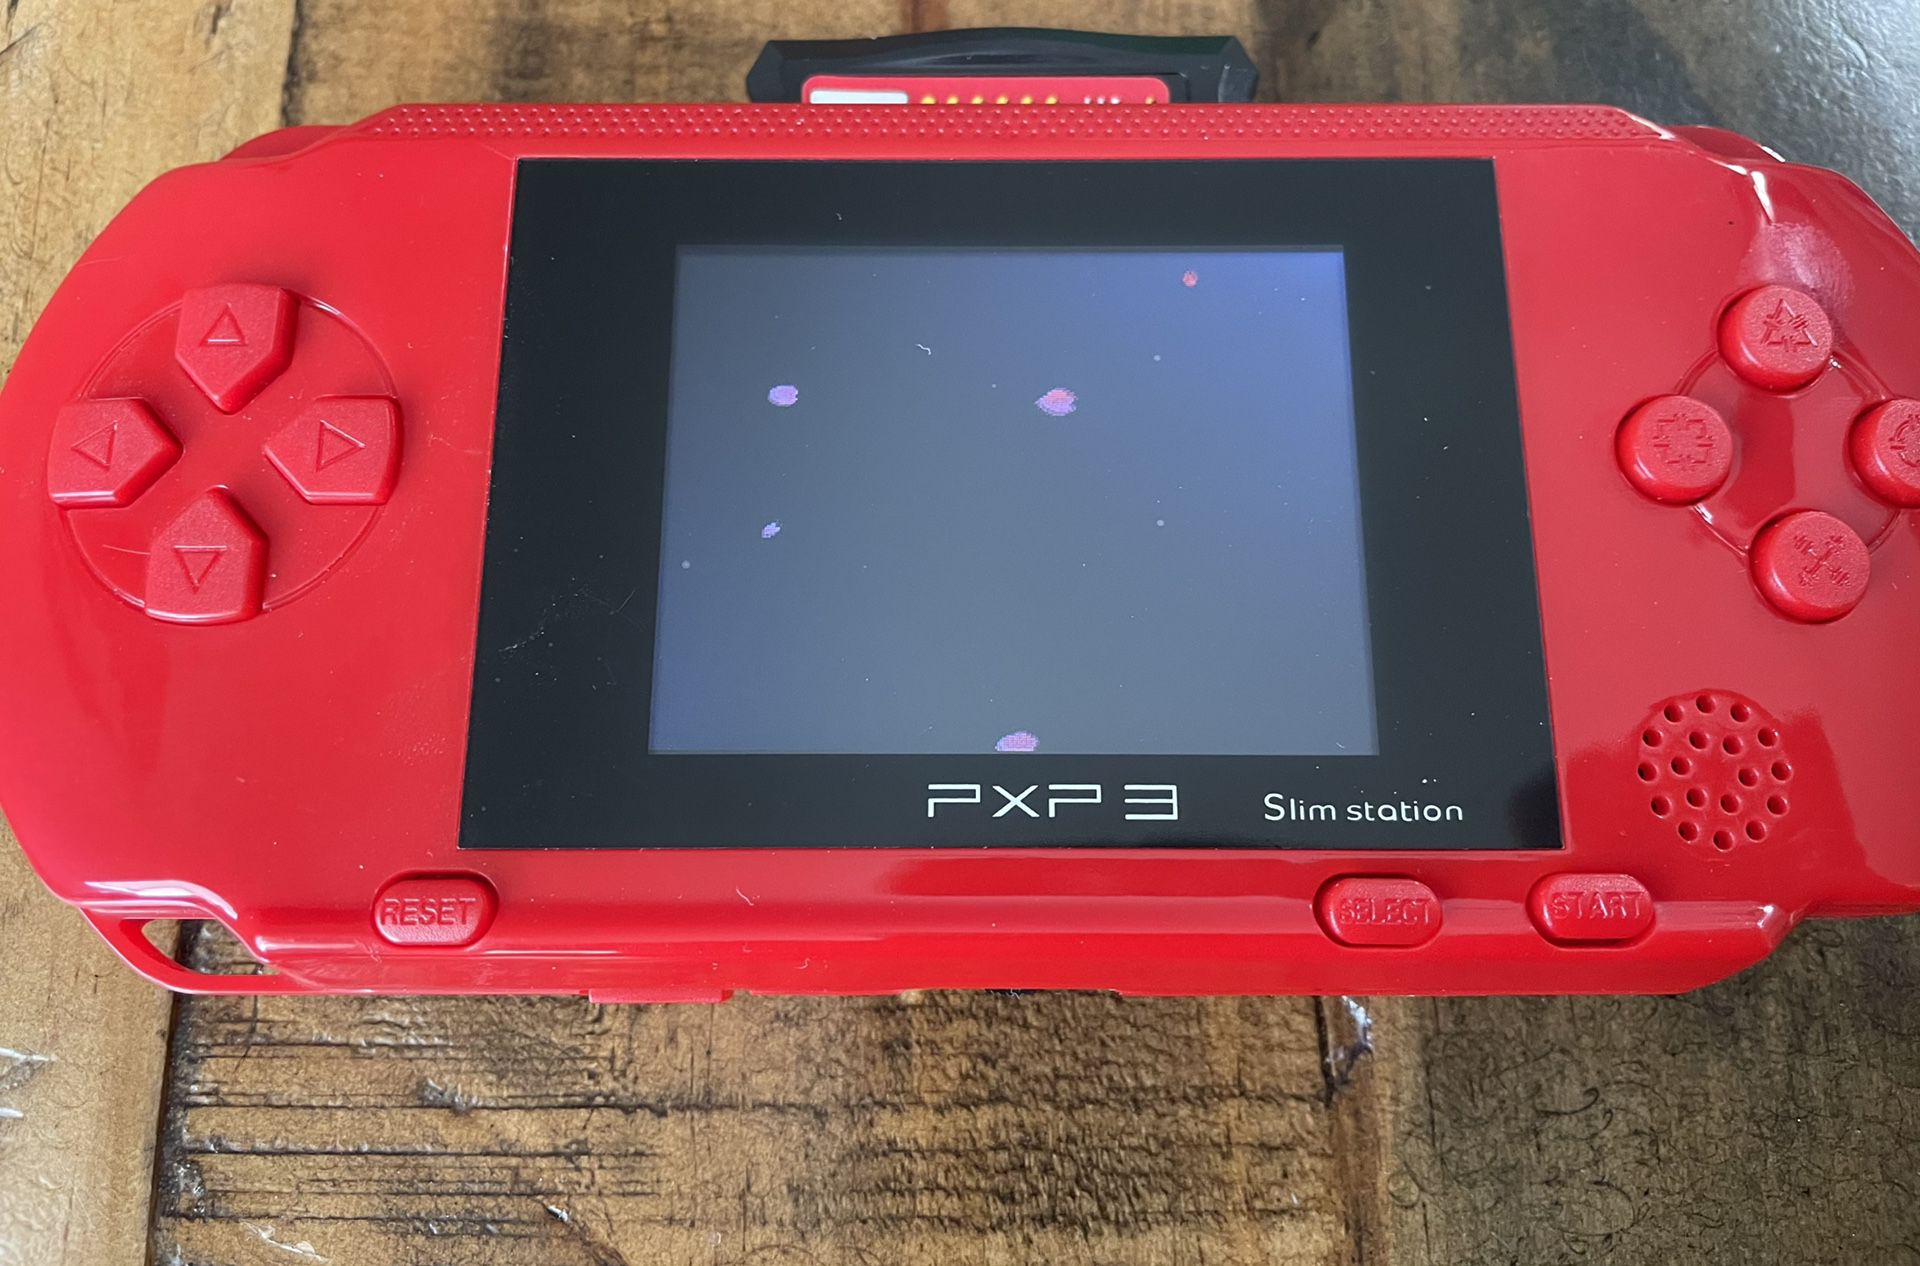 PXP 3 Slim Station Handheld Red Video Game System With Box And Two  Cartridge. for Sale in El Cajon, CA - OfferUp